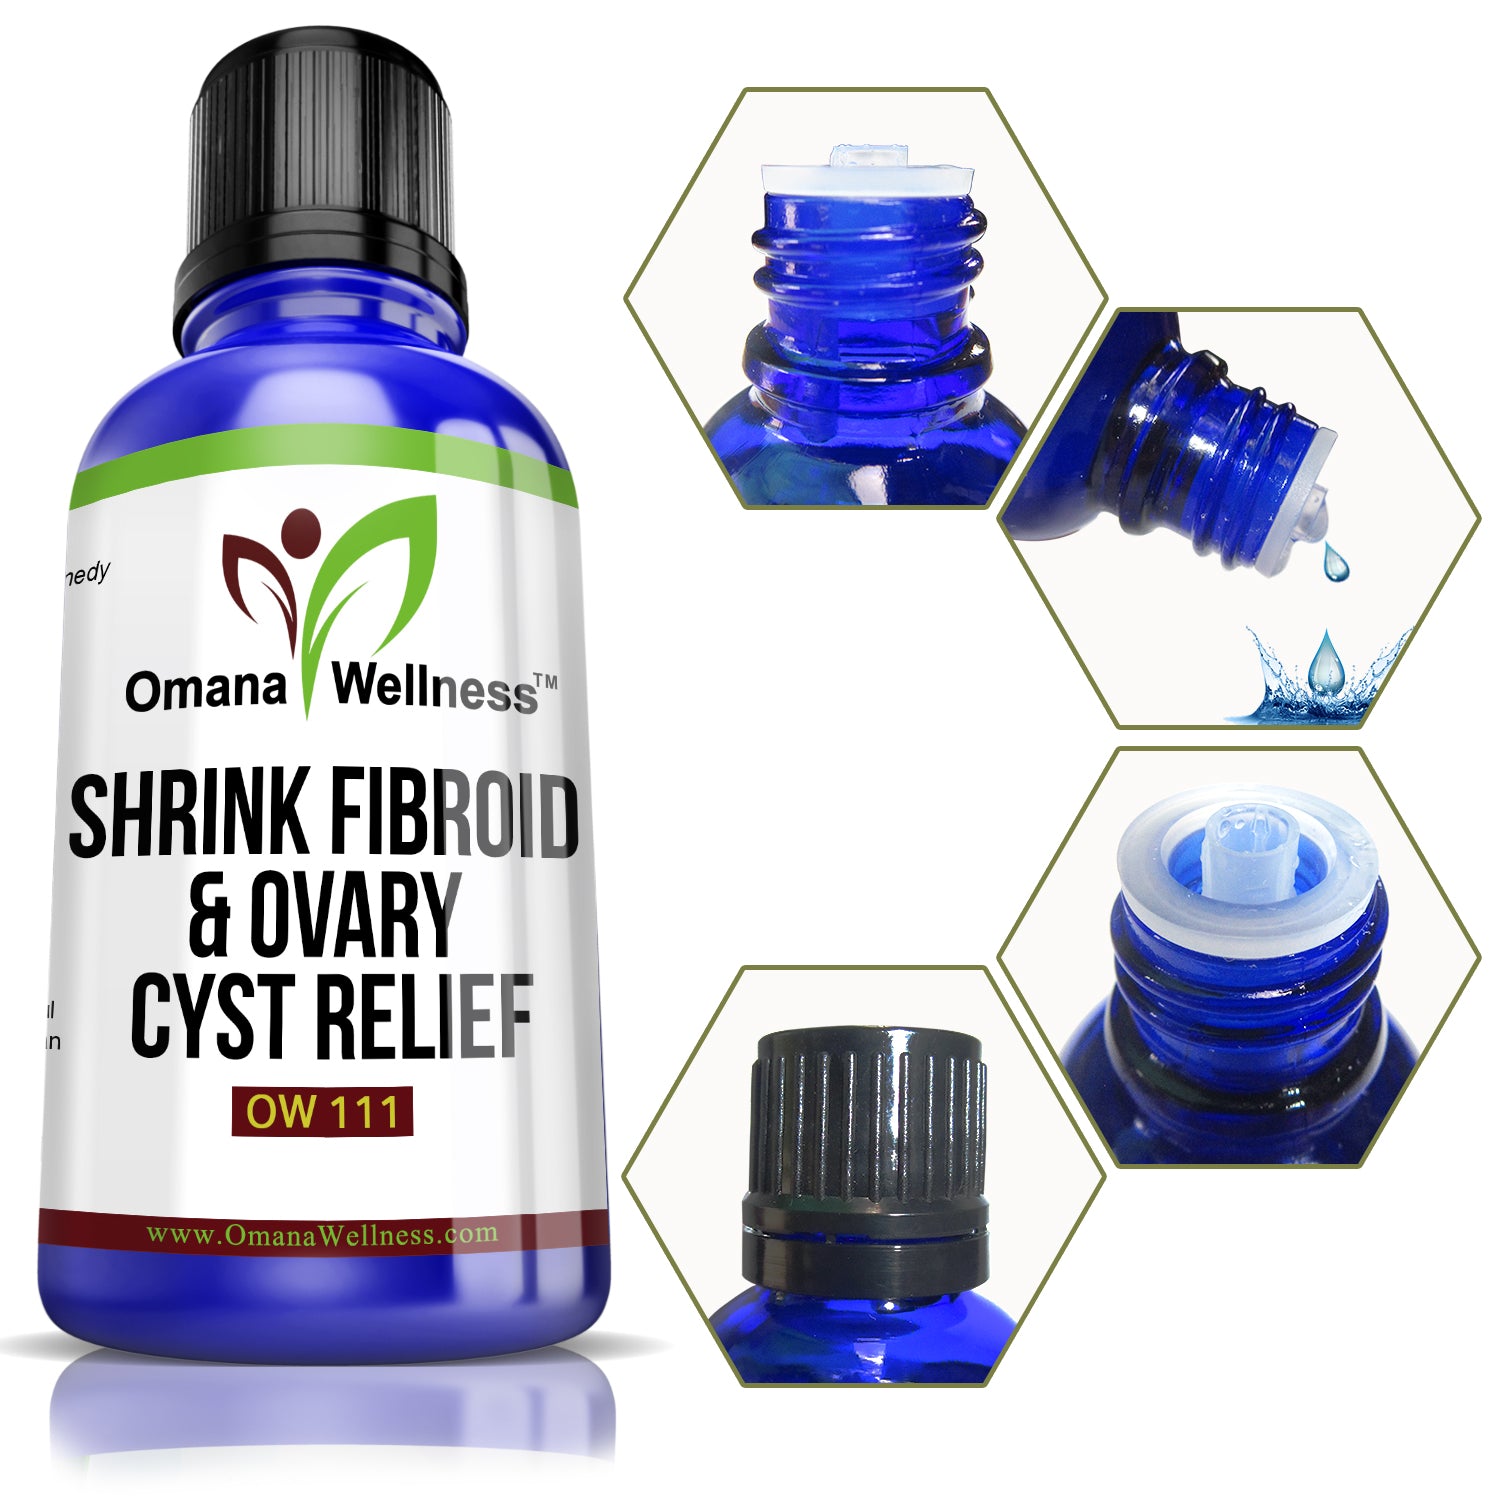 SHRINK FIBROID & OVARY CYST RELIEF OW111